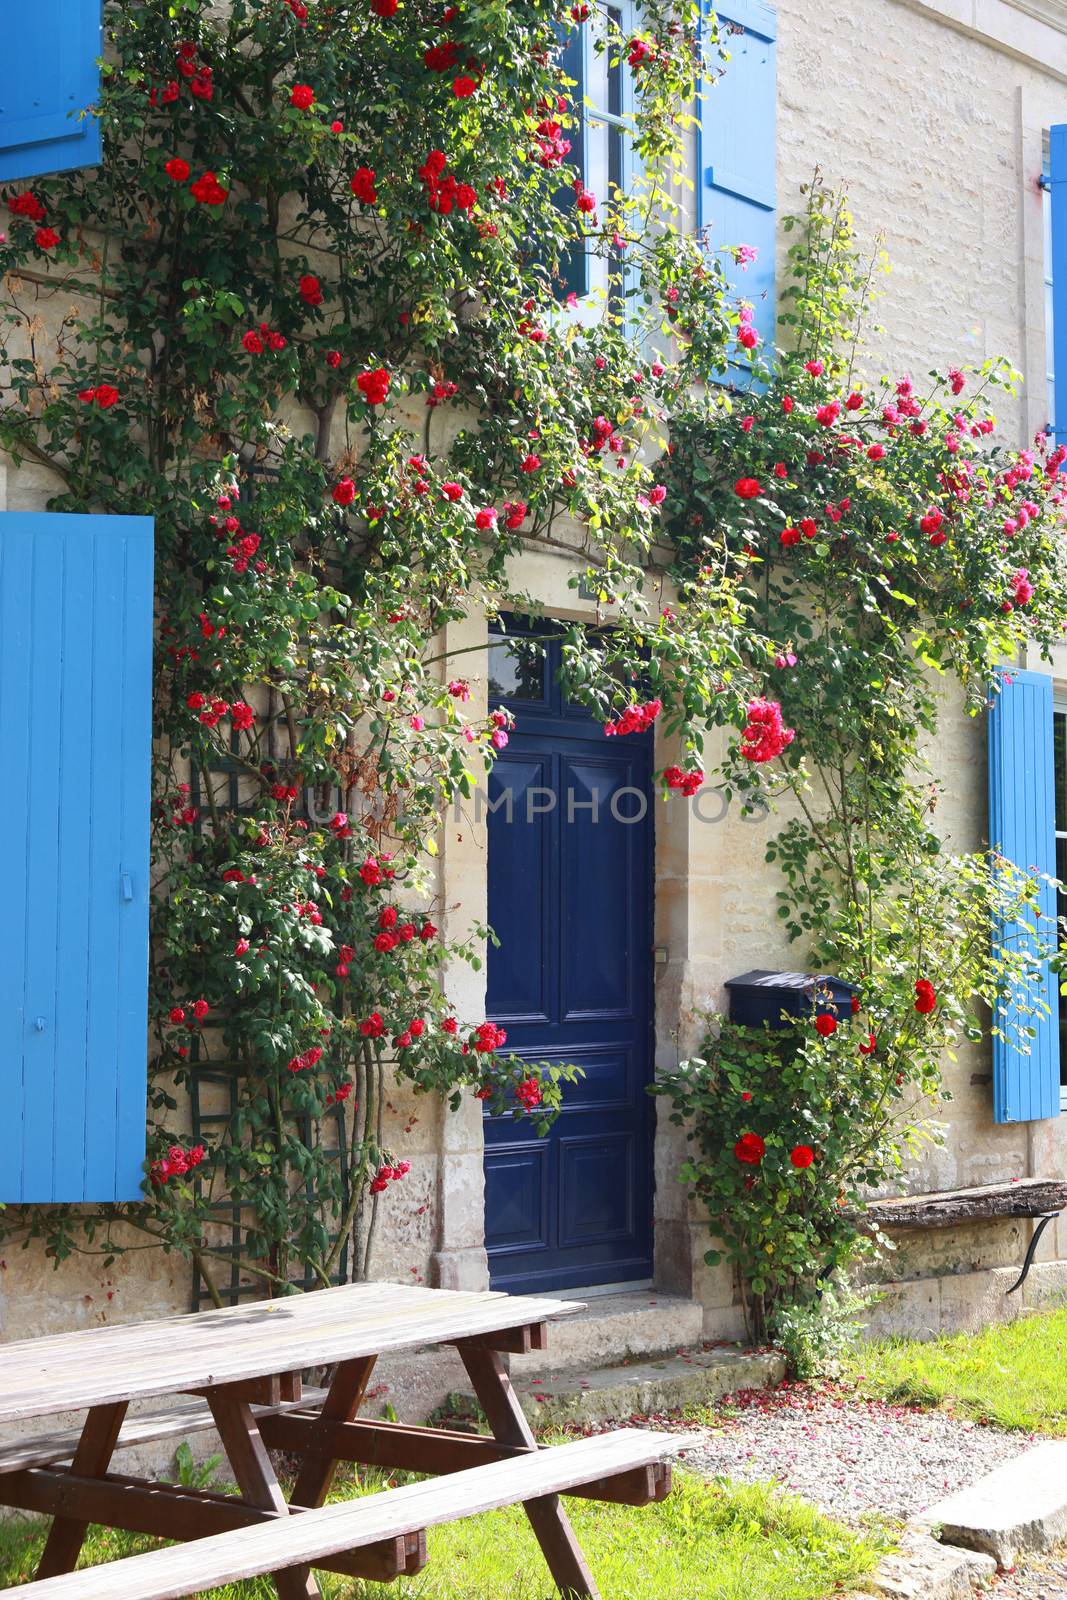 Pretty house covered in flowers by phovoir